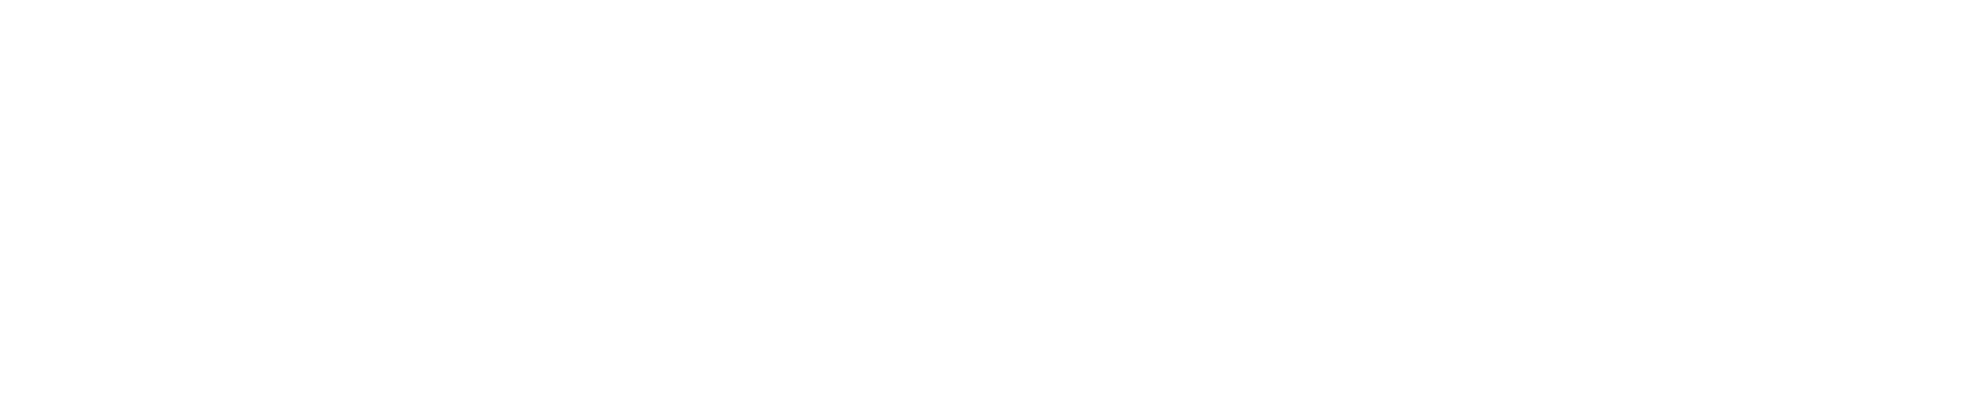 Black River Systems